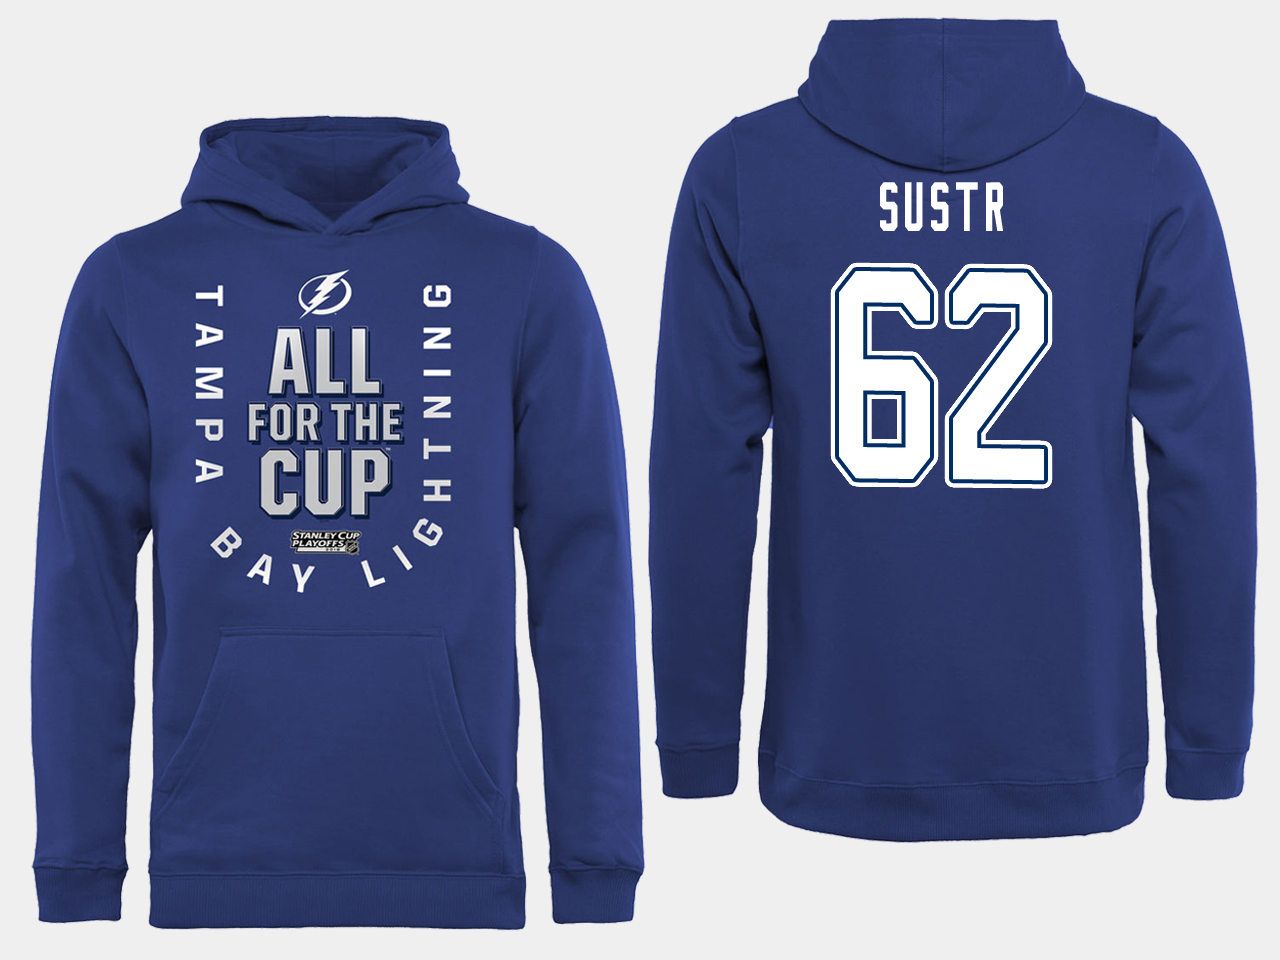 NHL Men adidas Tampa Bay Lightning #62 Sustr blue All for the Cup Hoodie